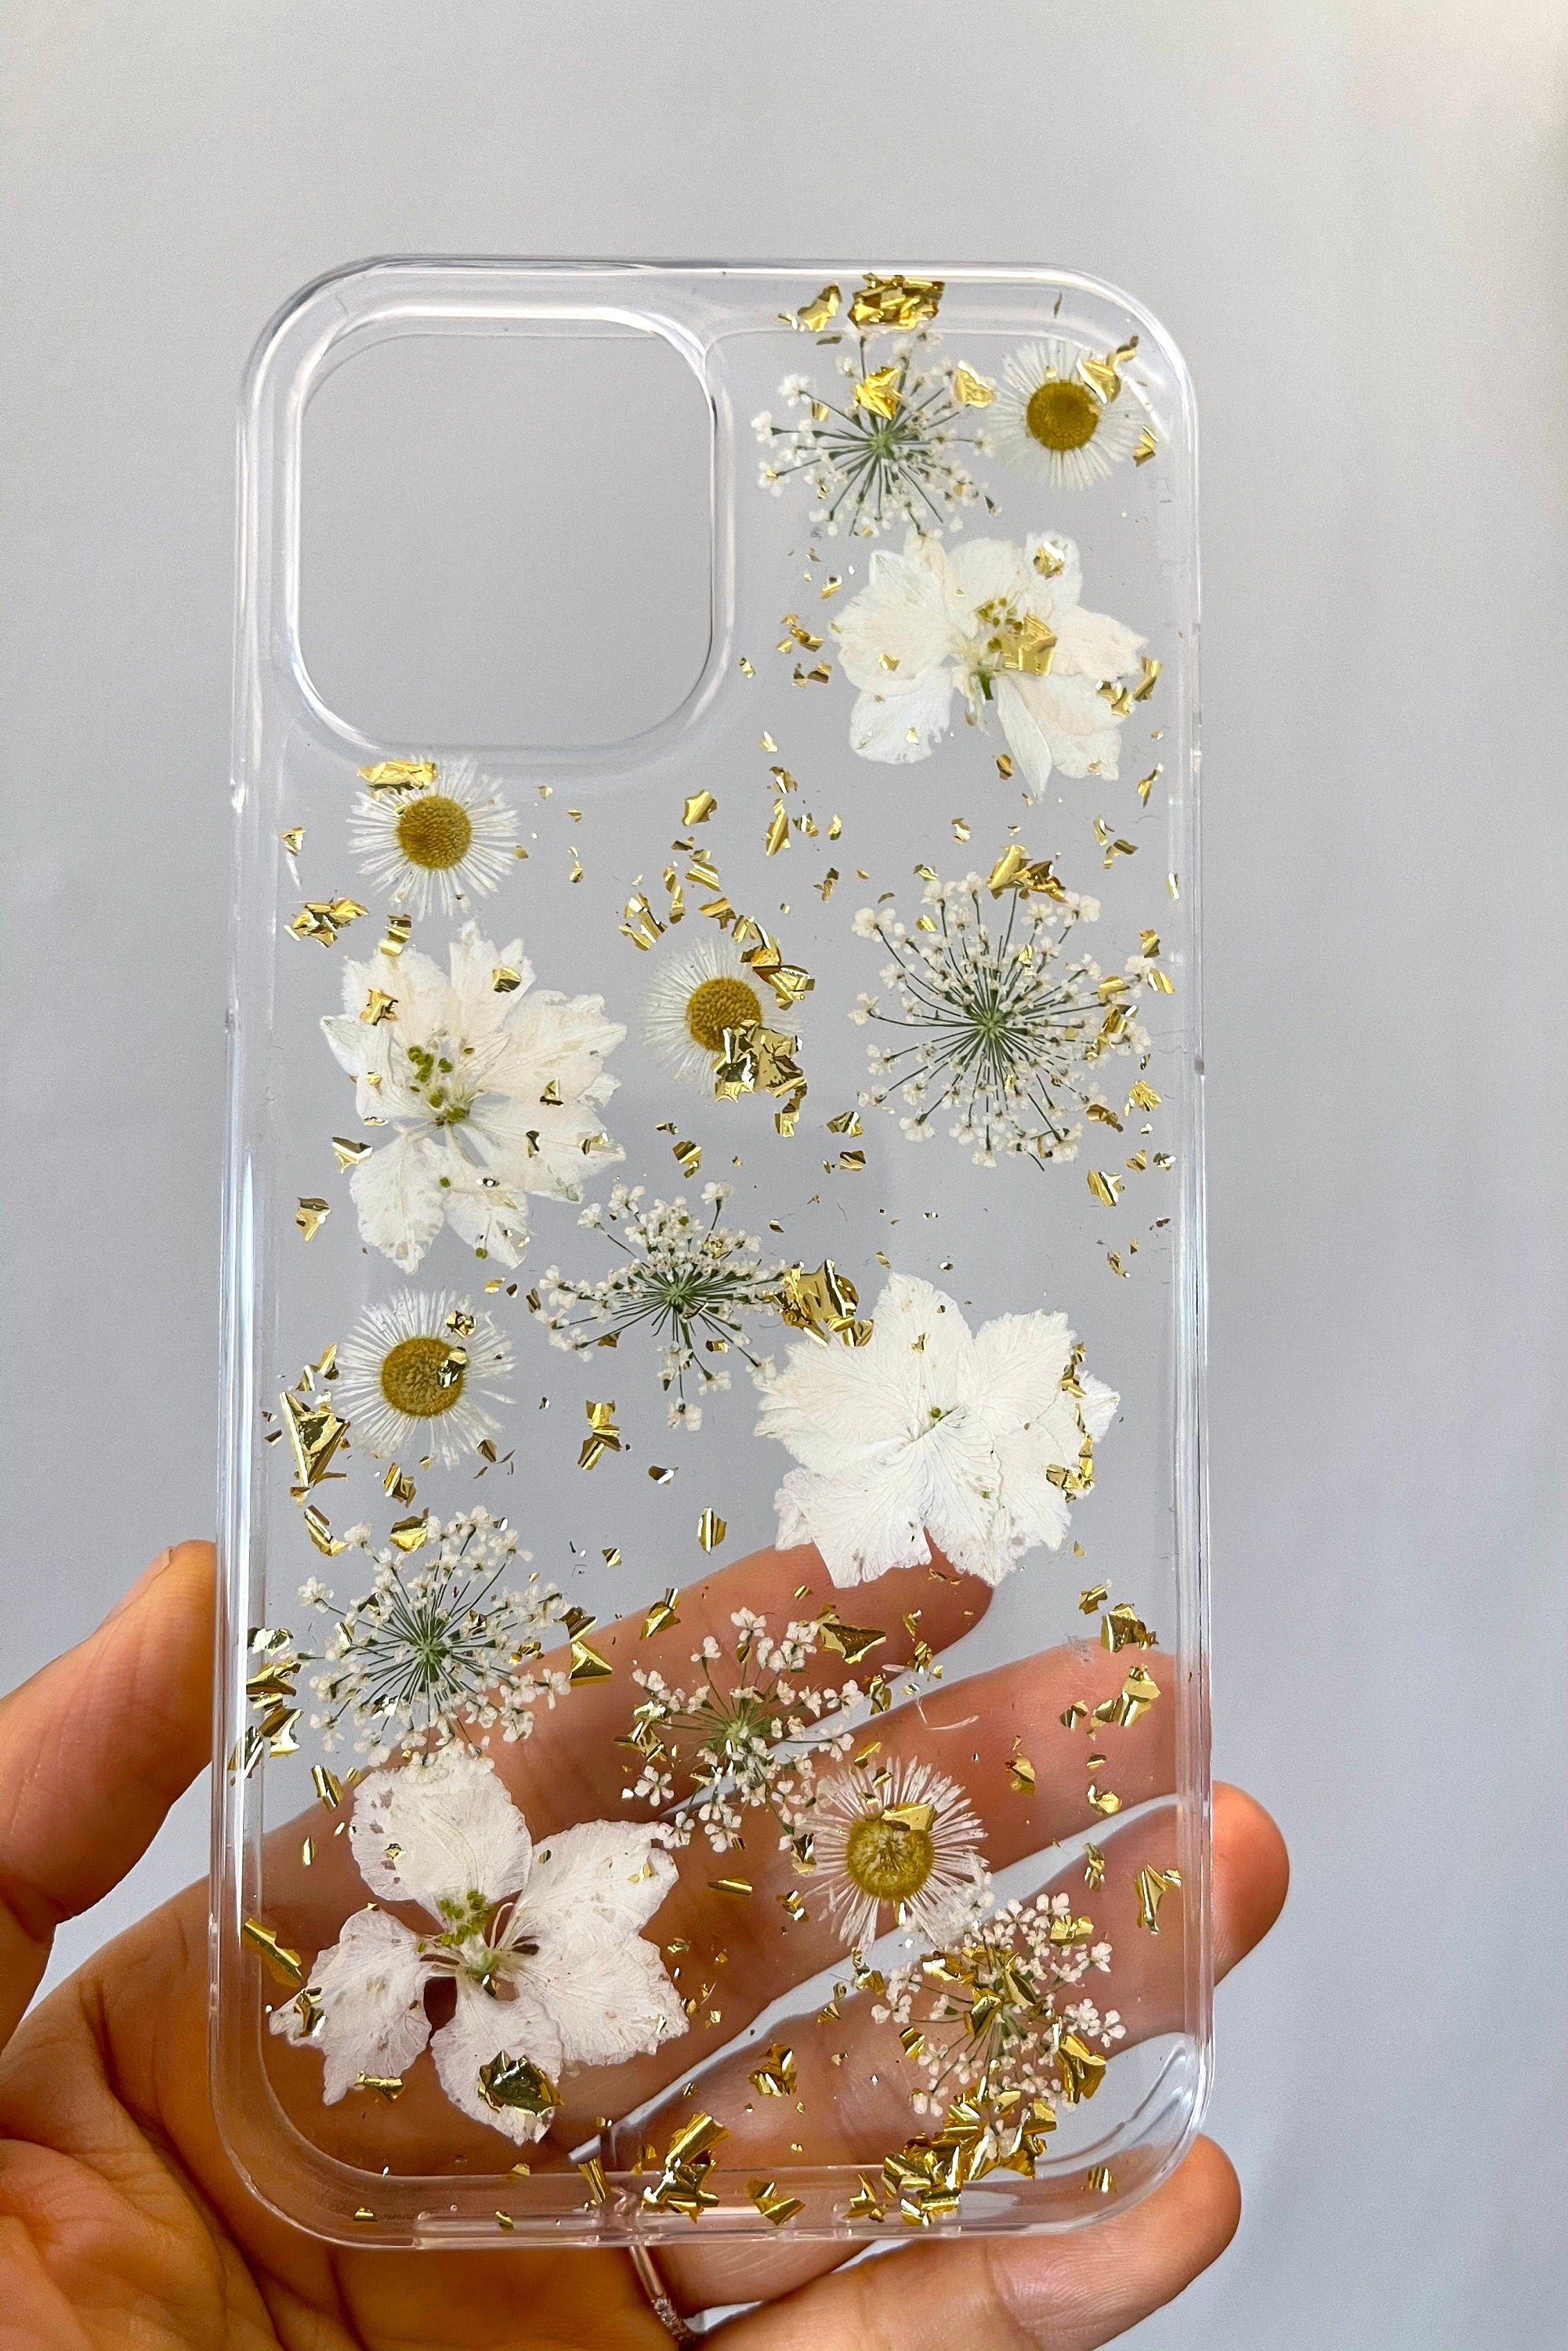 SALE - Hand Pressed Flowers and Glitters iPhone 12, 12 Pro, 12 Pro Max Floral Case Soft Silicone Case